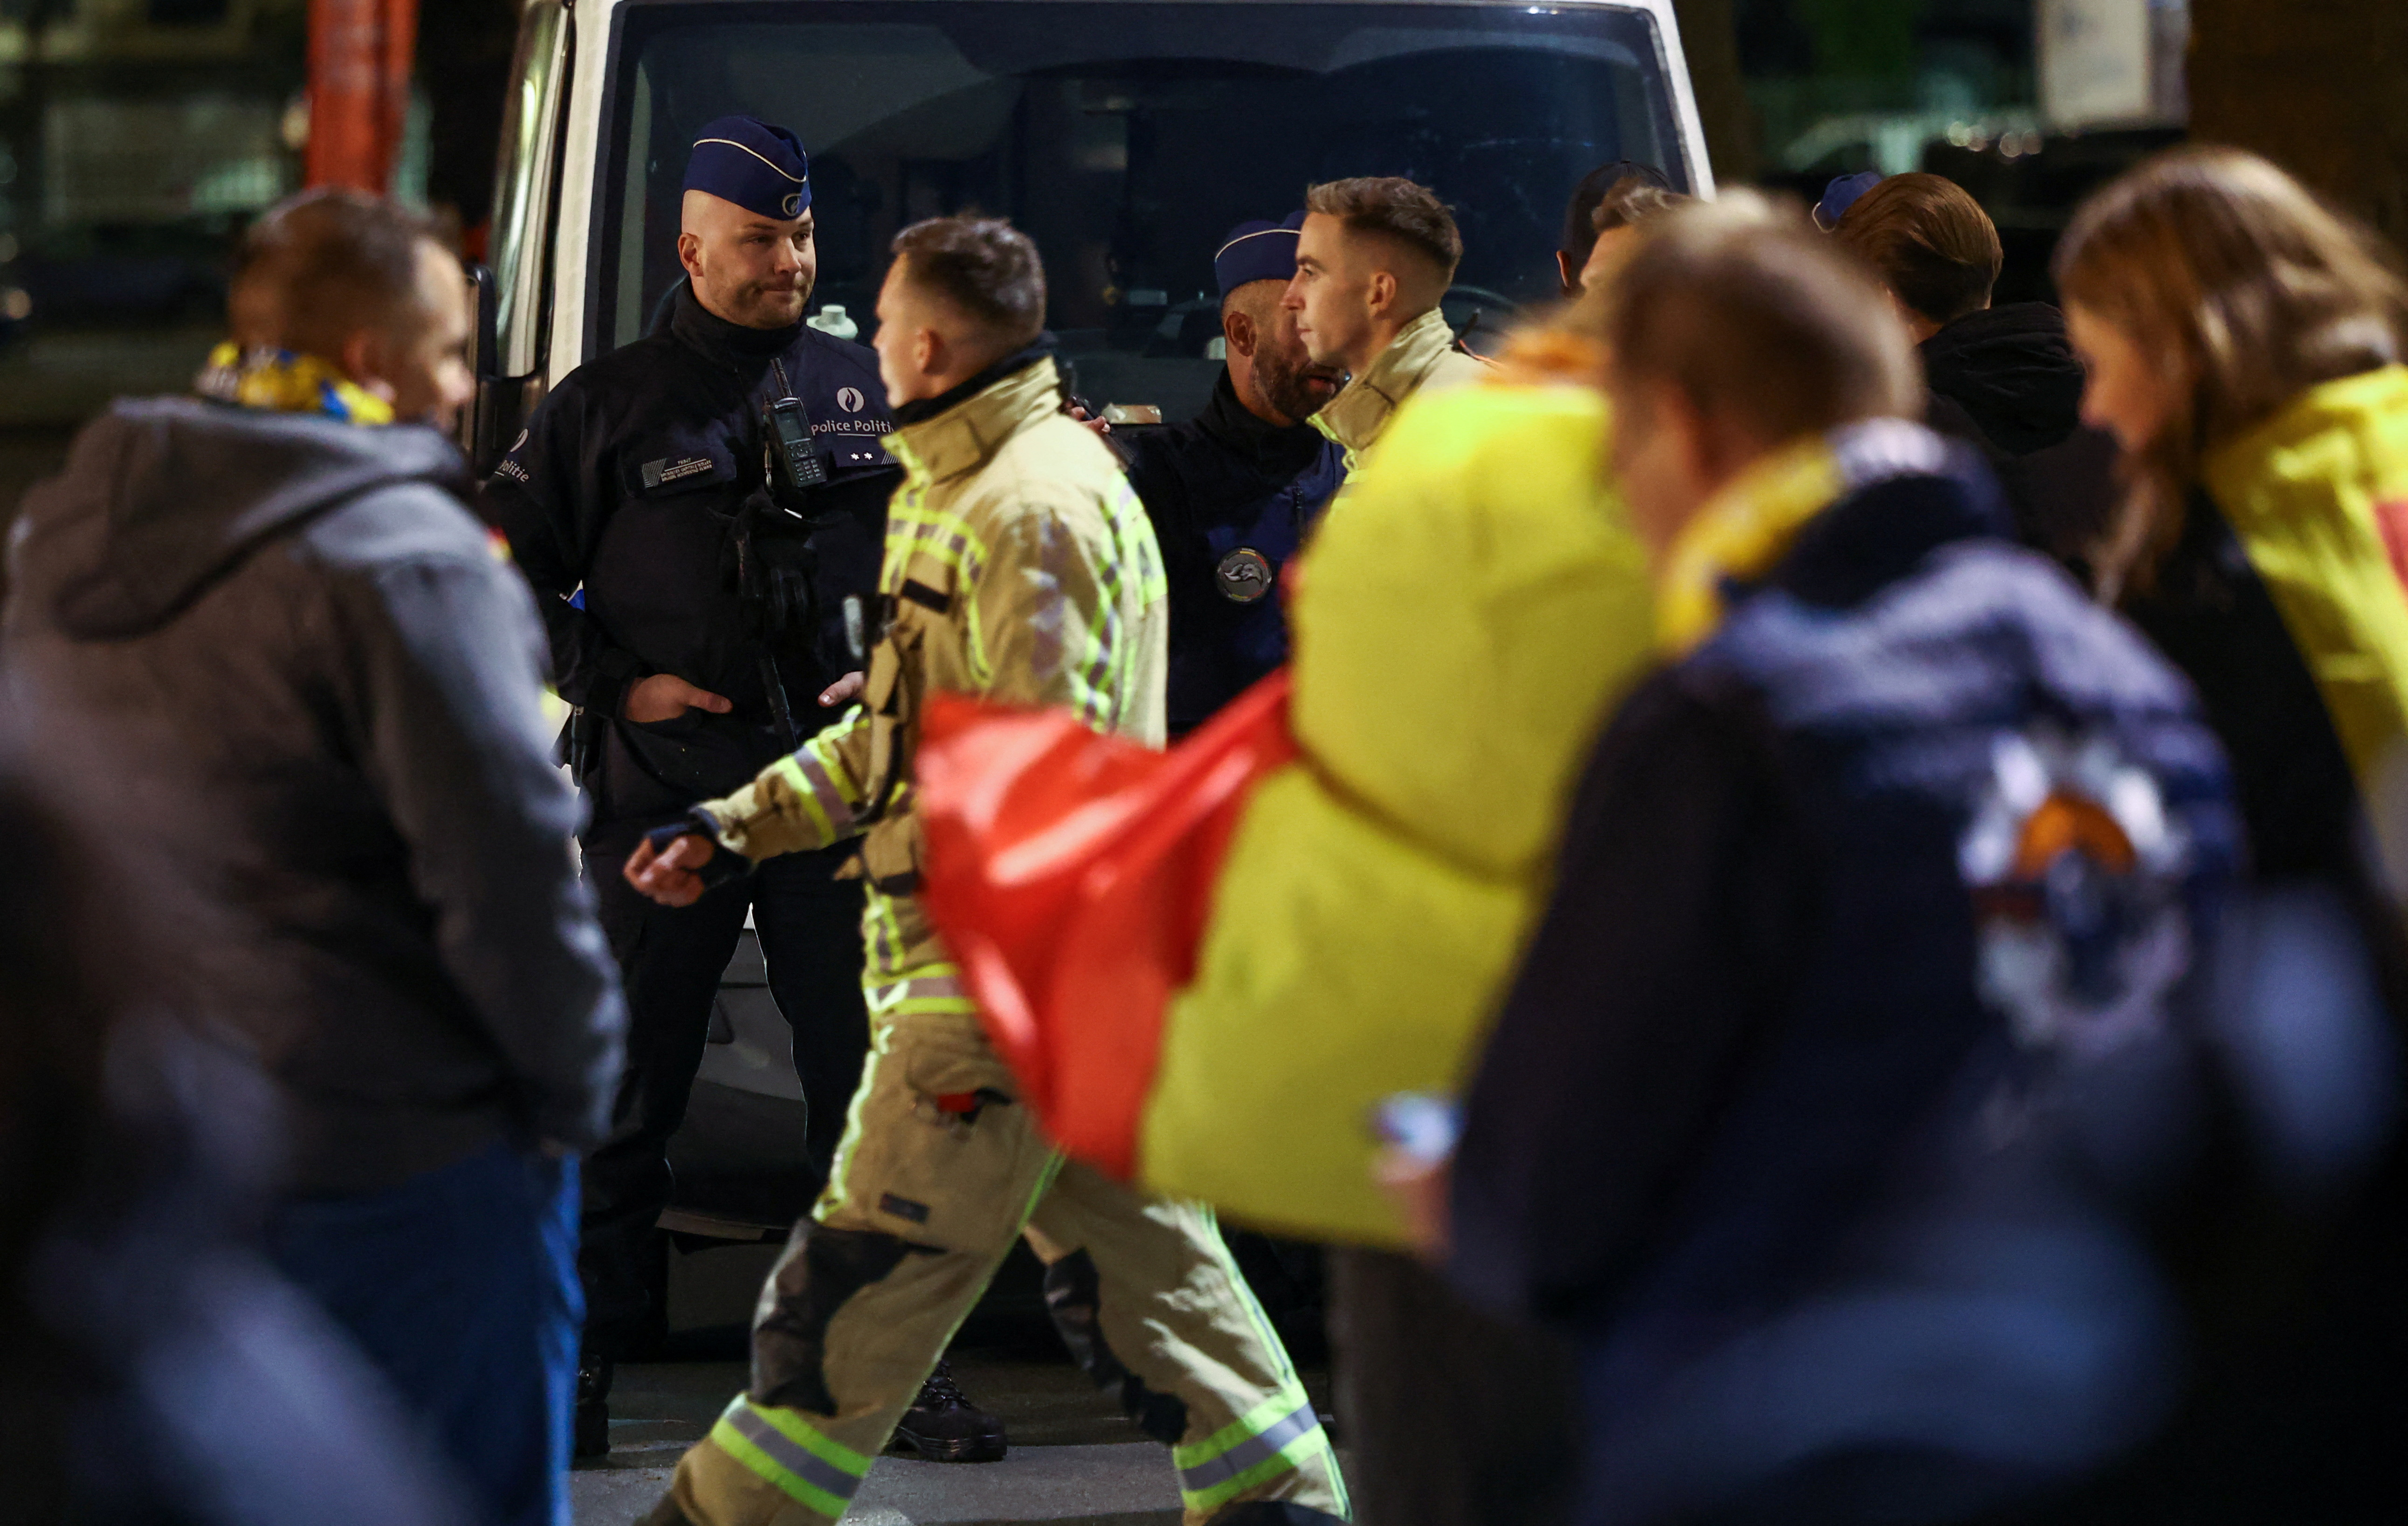 Man claiming to be ISIS member avenging the murder of US-Palestinian boy, kills two people wearing Sweden football shirts�in�Belgium